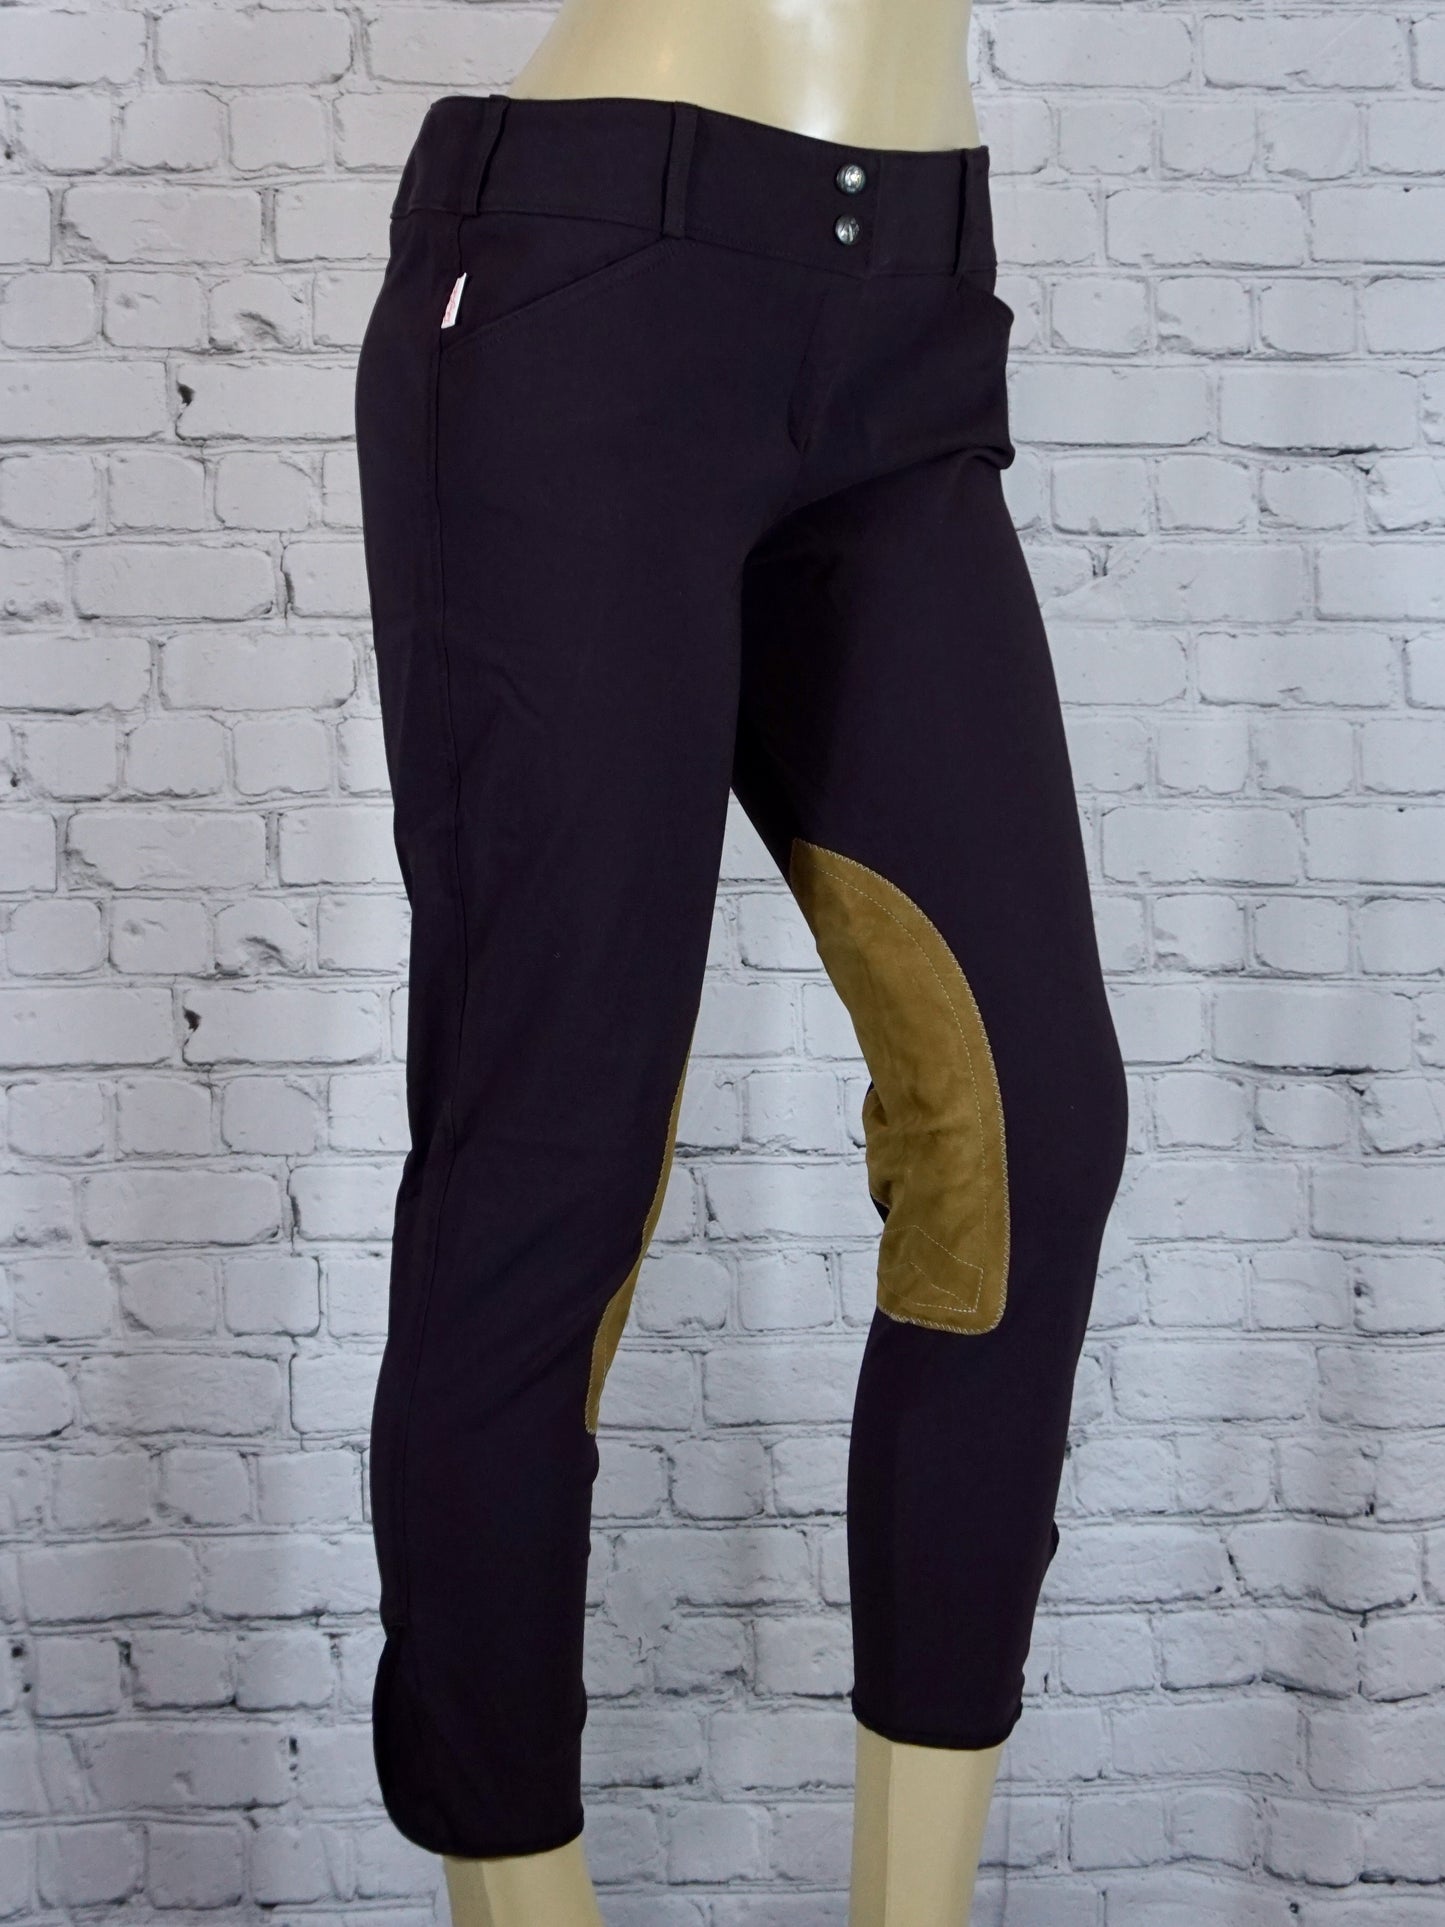 Tailored Sportsman Vintage Trophy Hunter Low Rise Front Zip Breeches (#1967)